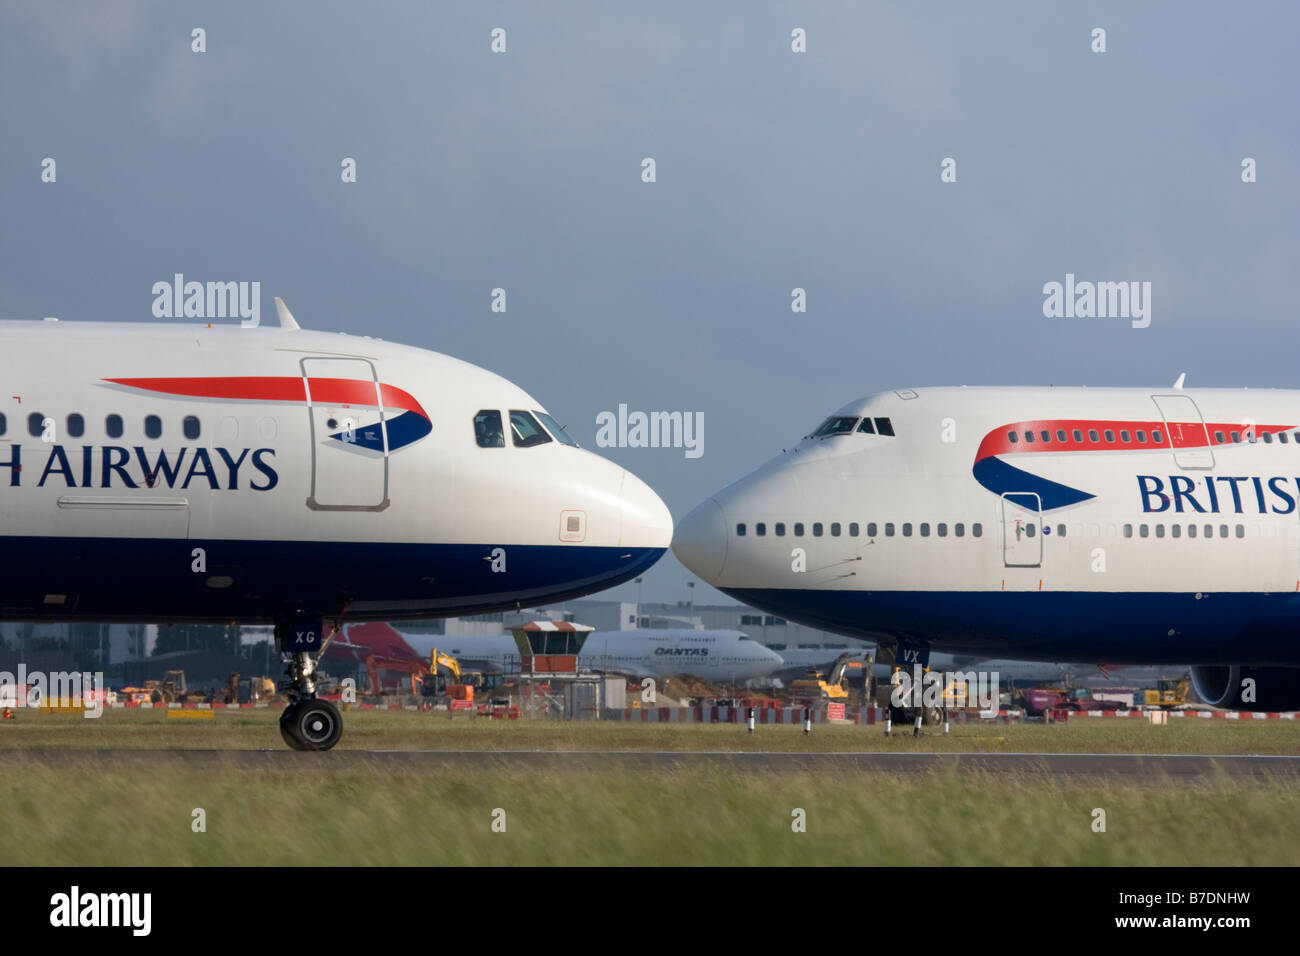 Short-haul and long-haul British Airways planes taxiing for departure at London Heathrow Airport, United Kingdom Stock Photo